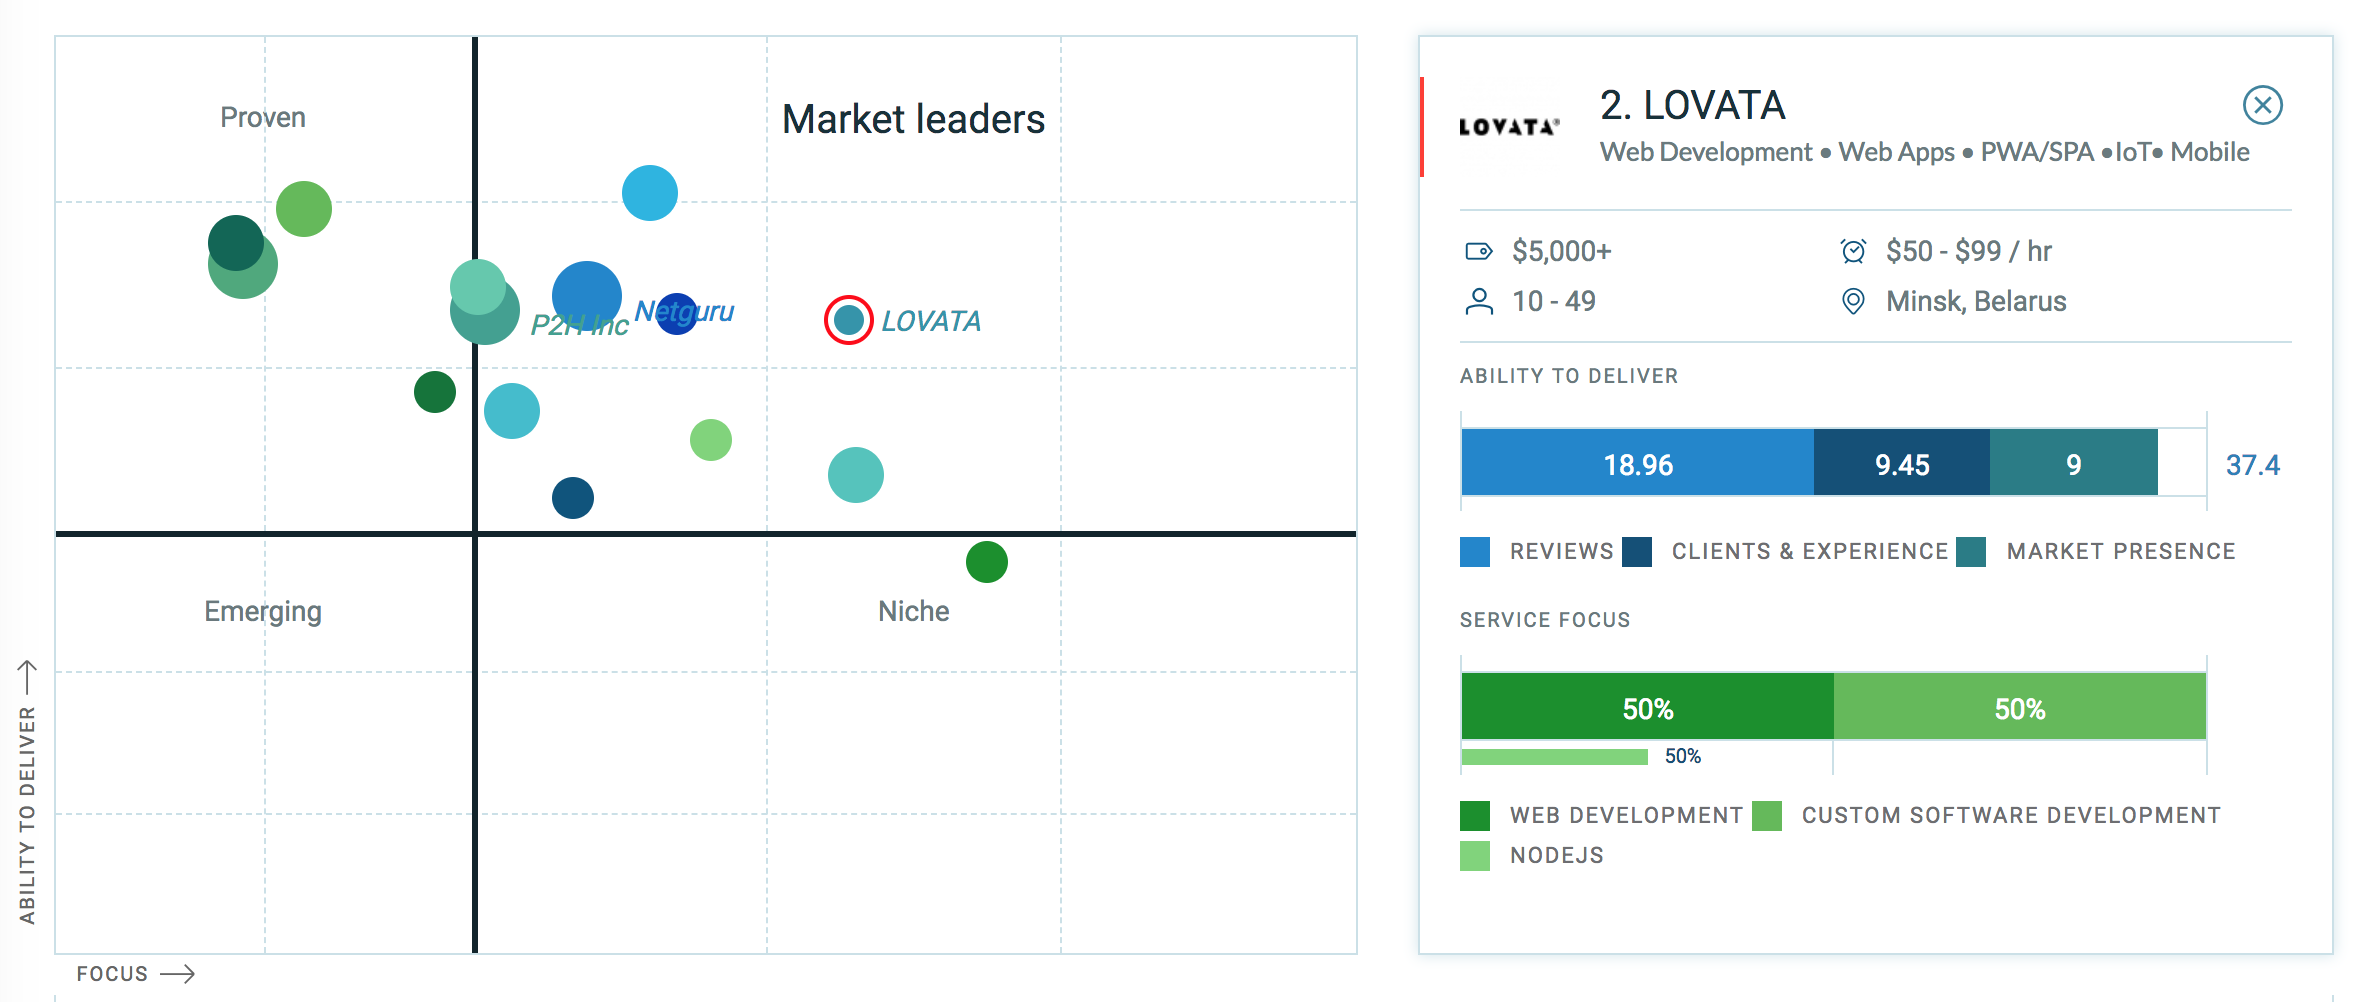 image of Node JS Leaders Matrix with LOVATA on second place